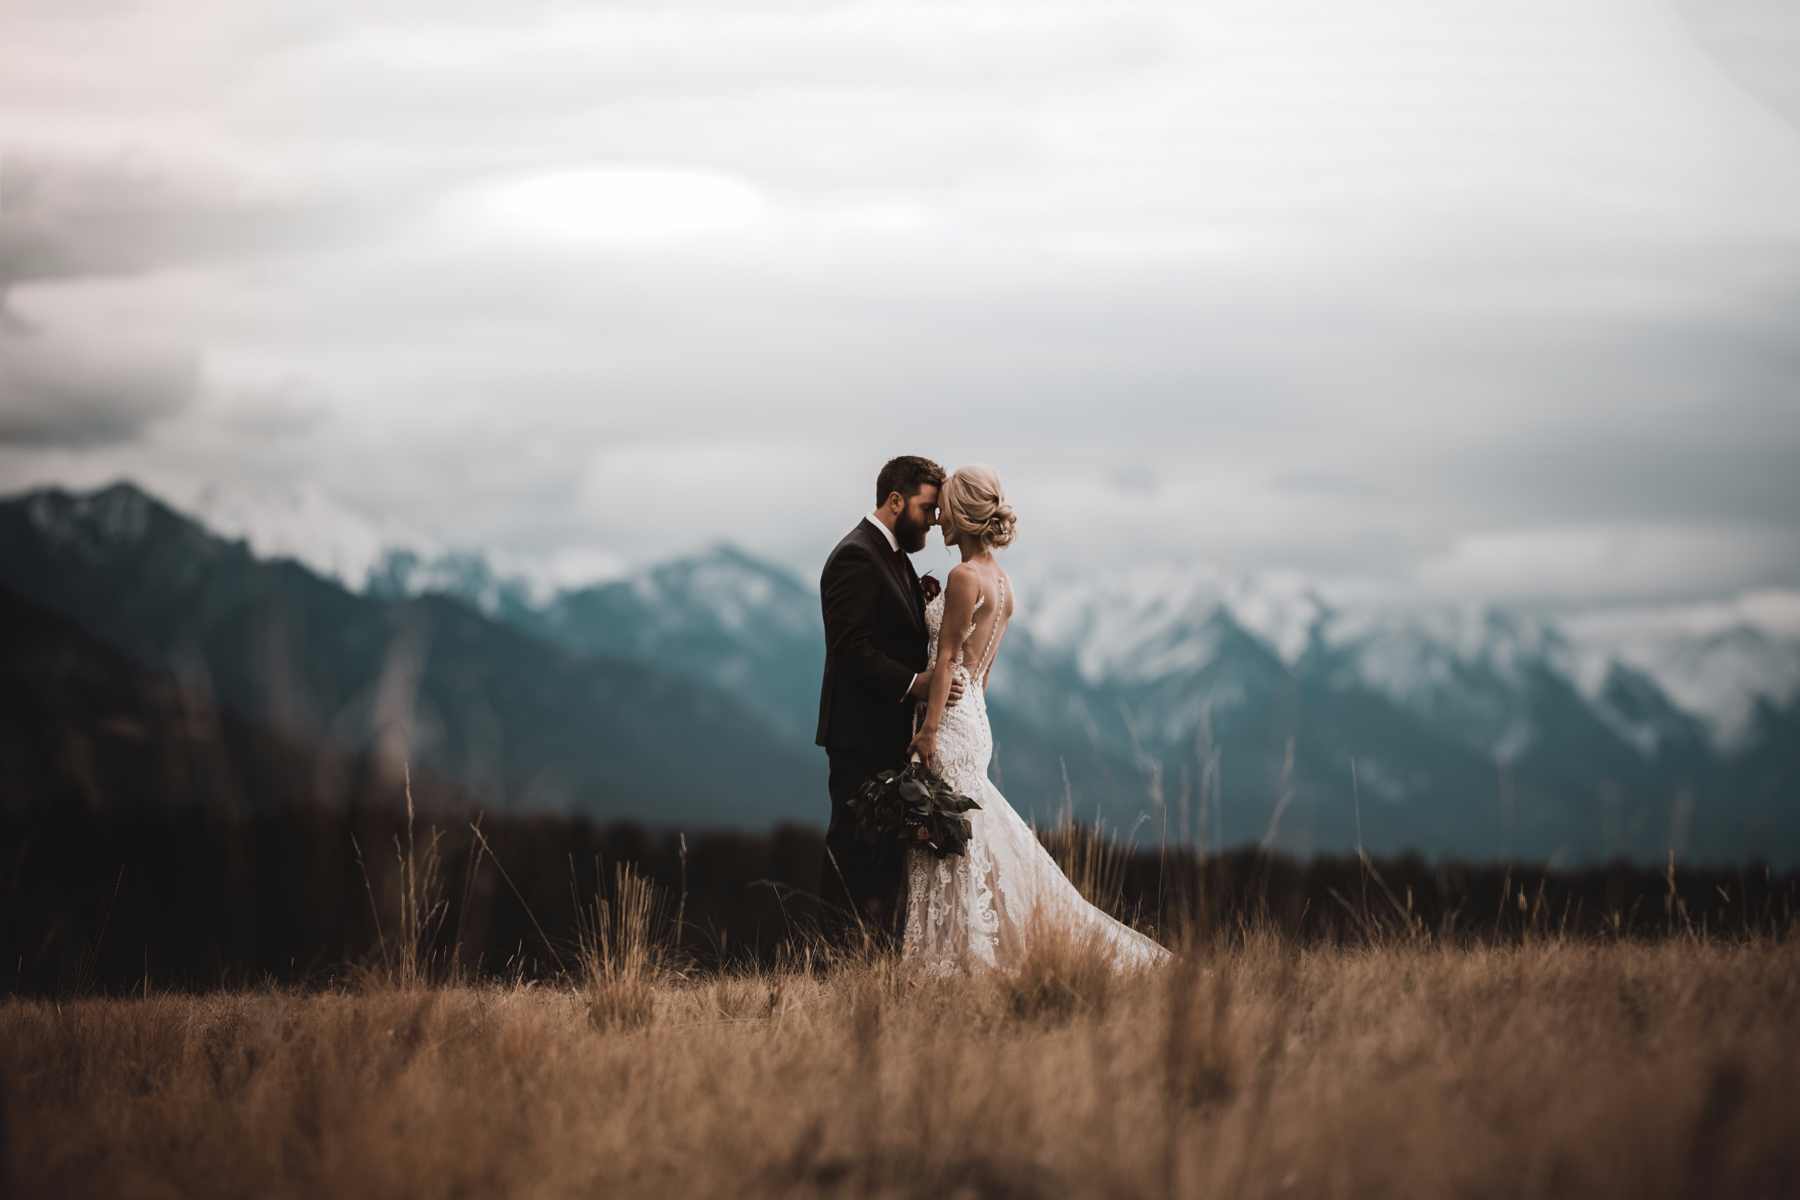 Calgary wedding photographer in Invermere for adventurous mountain destination elopement at Eagle Ranch Golf Resort, British Columbia - Image 21